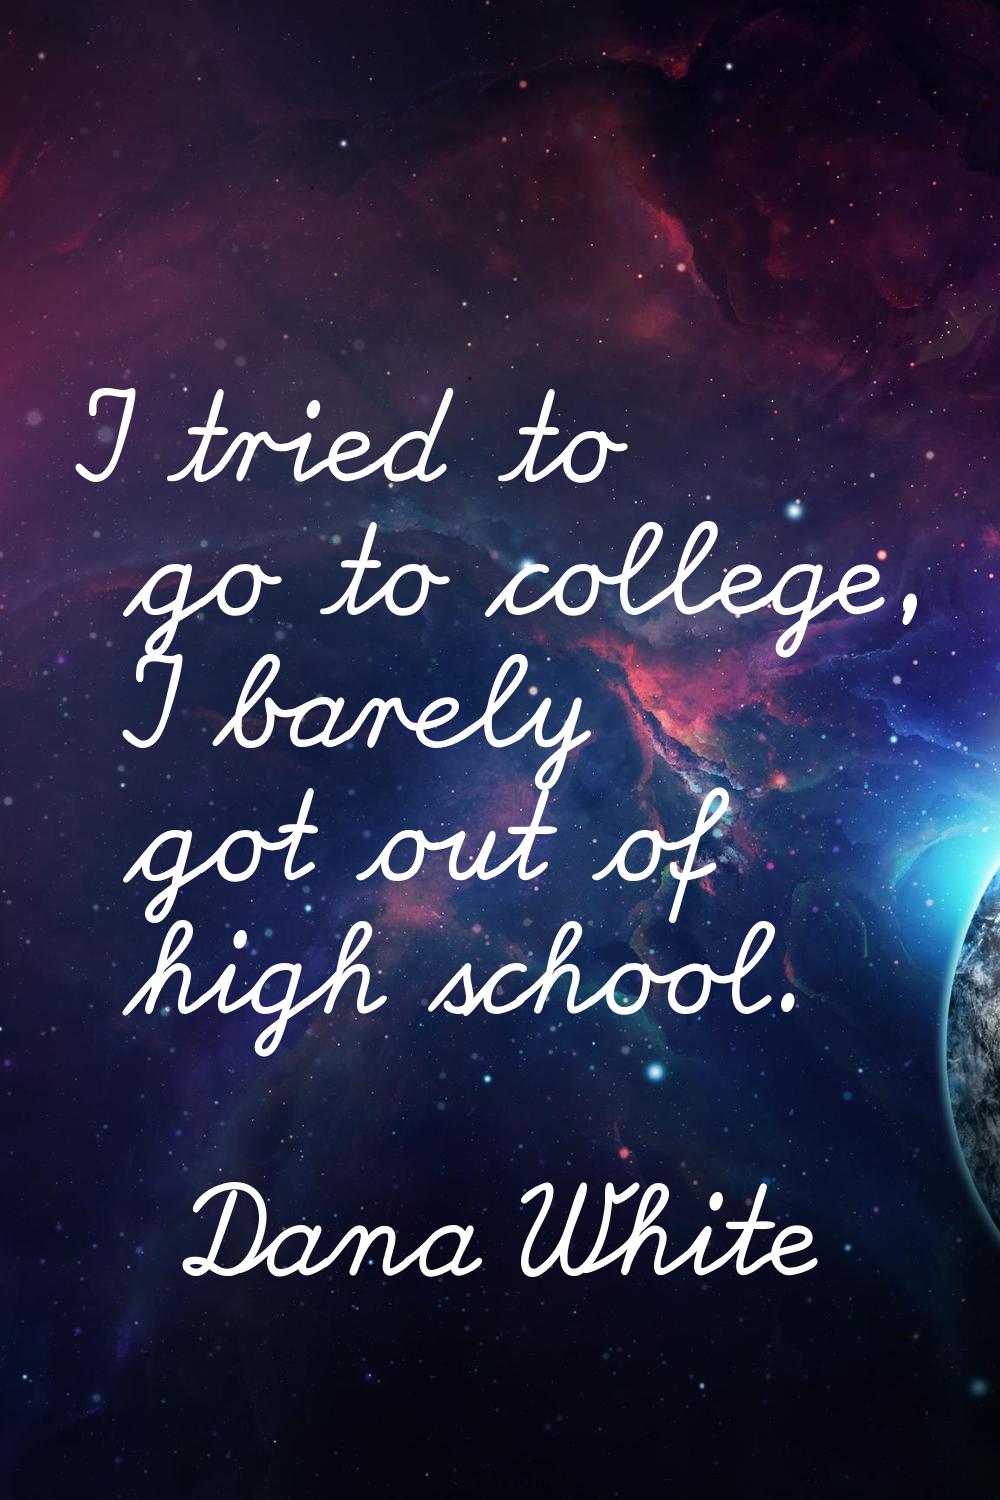 I tried to go to college, I barely got out of high school.